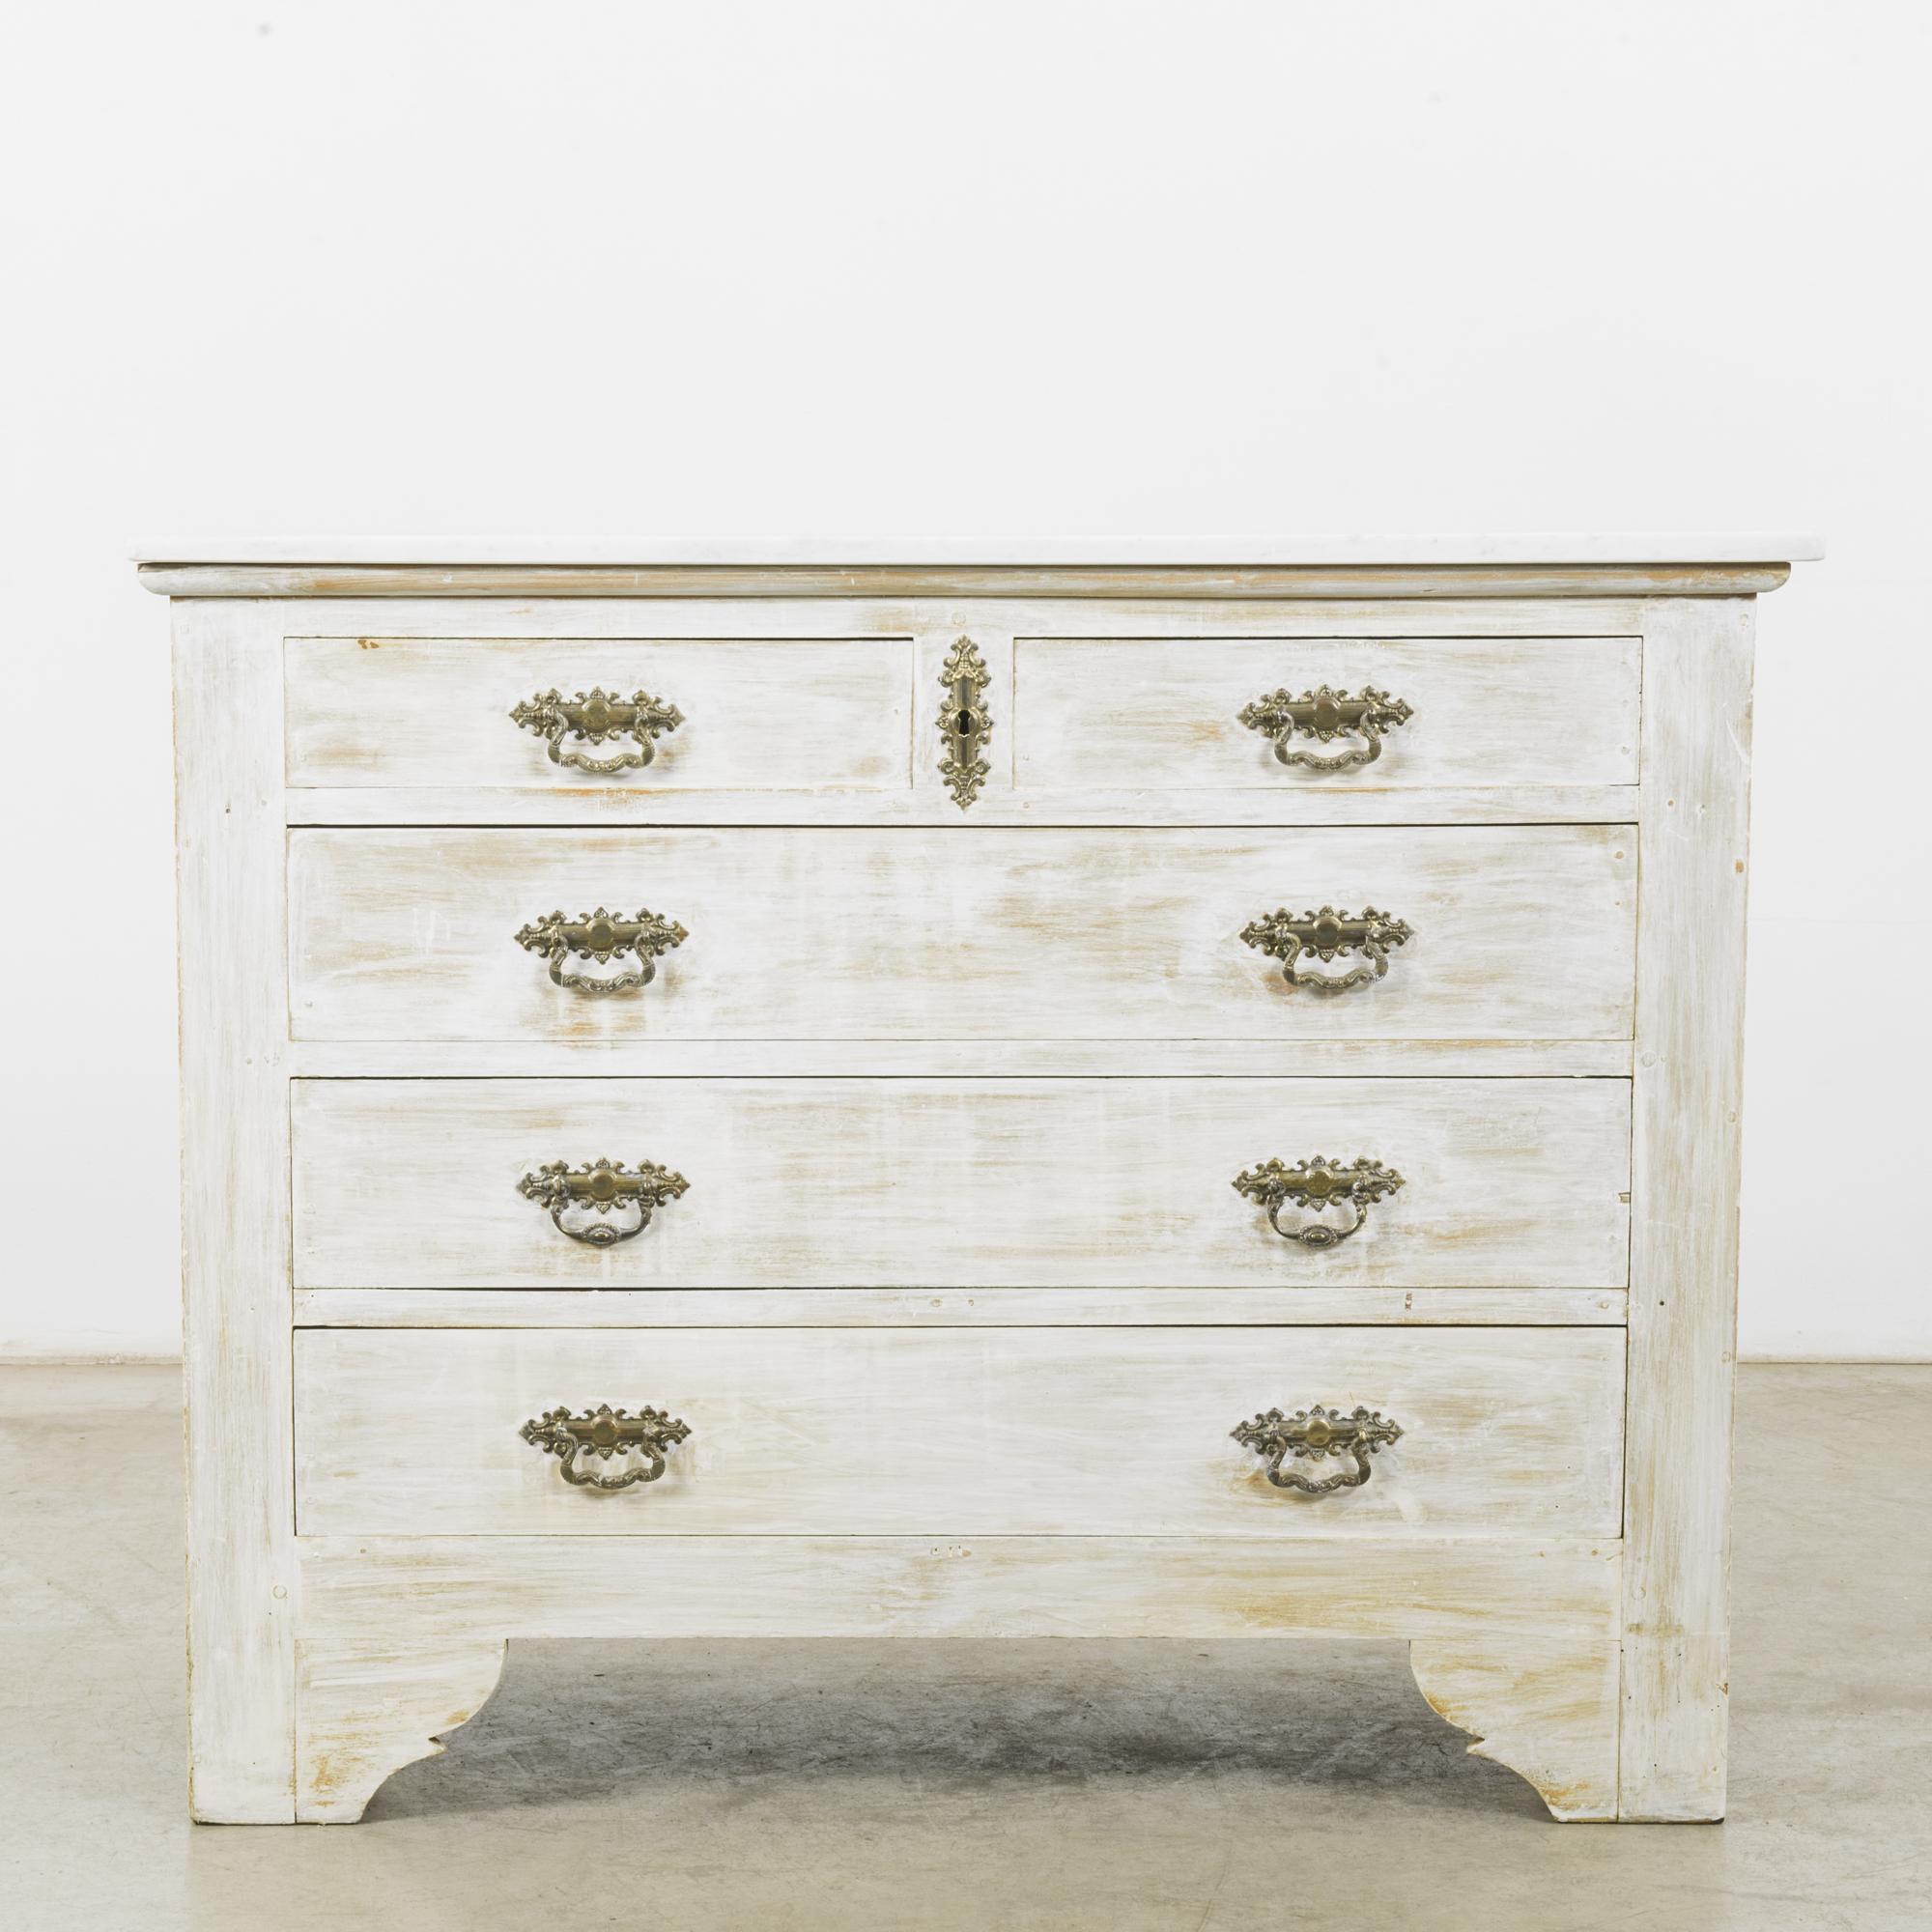 This wooden chest of drawers with a white marble top was made in France, circa 1880. The geometric silhouette is adorned simply with bracket feet and a shaped base on the sides, giving this piece a calm and stately appearance. With a beautifully